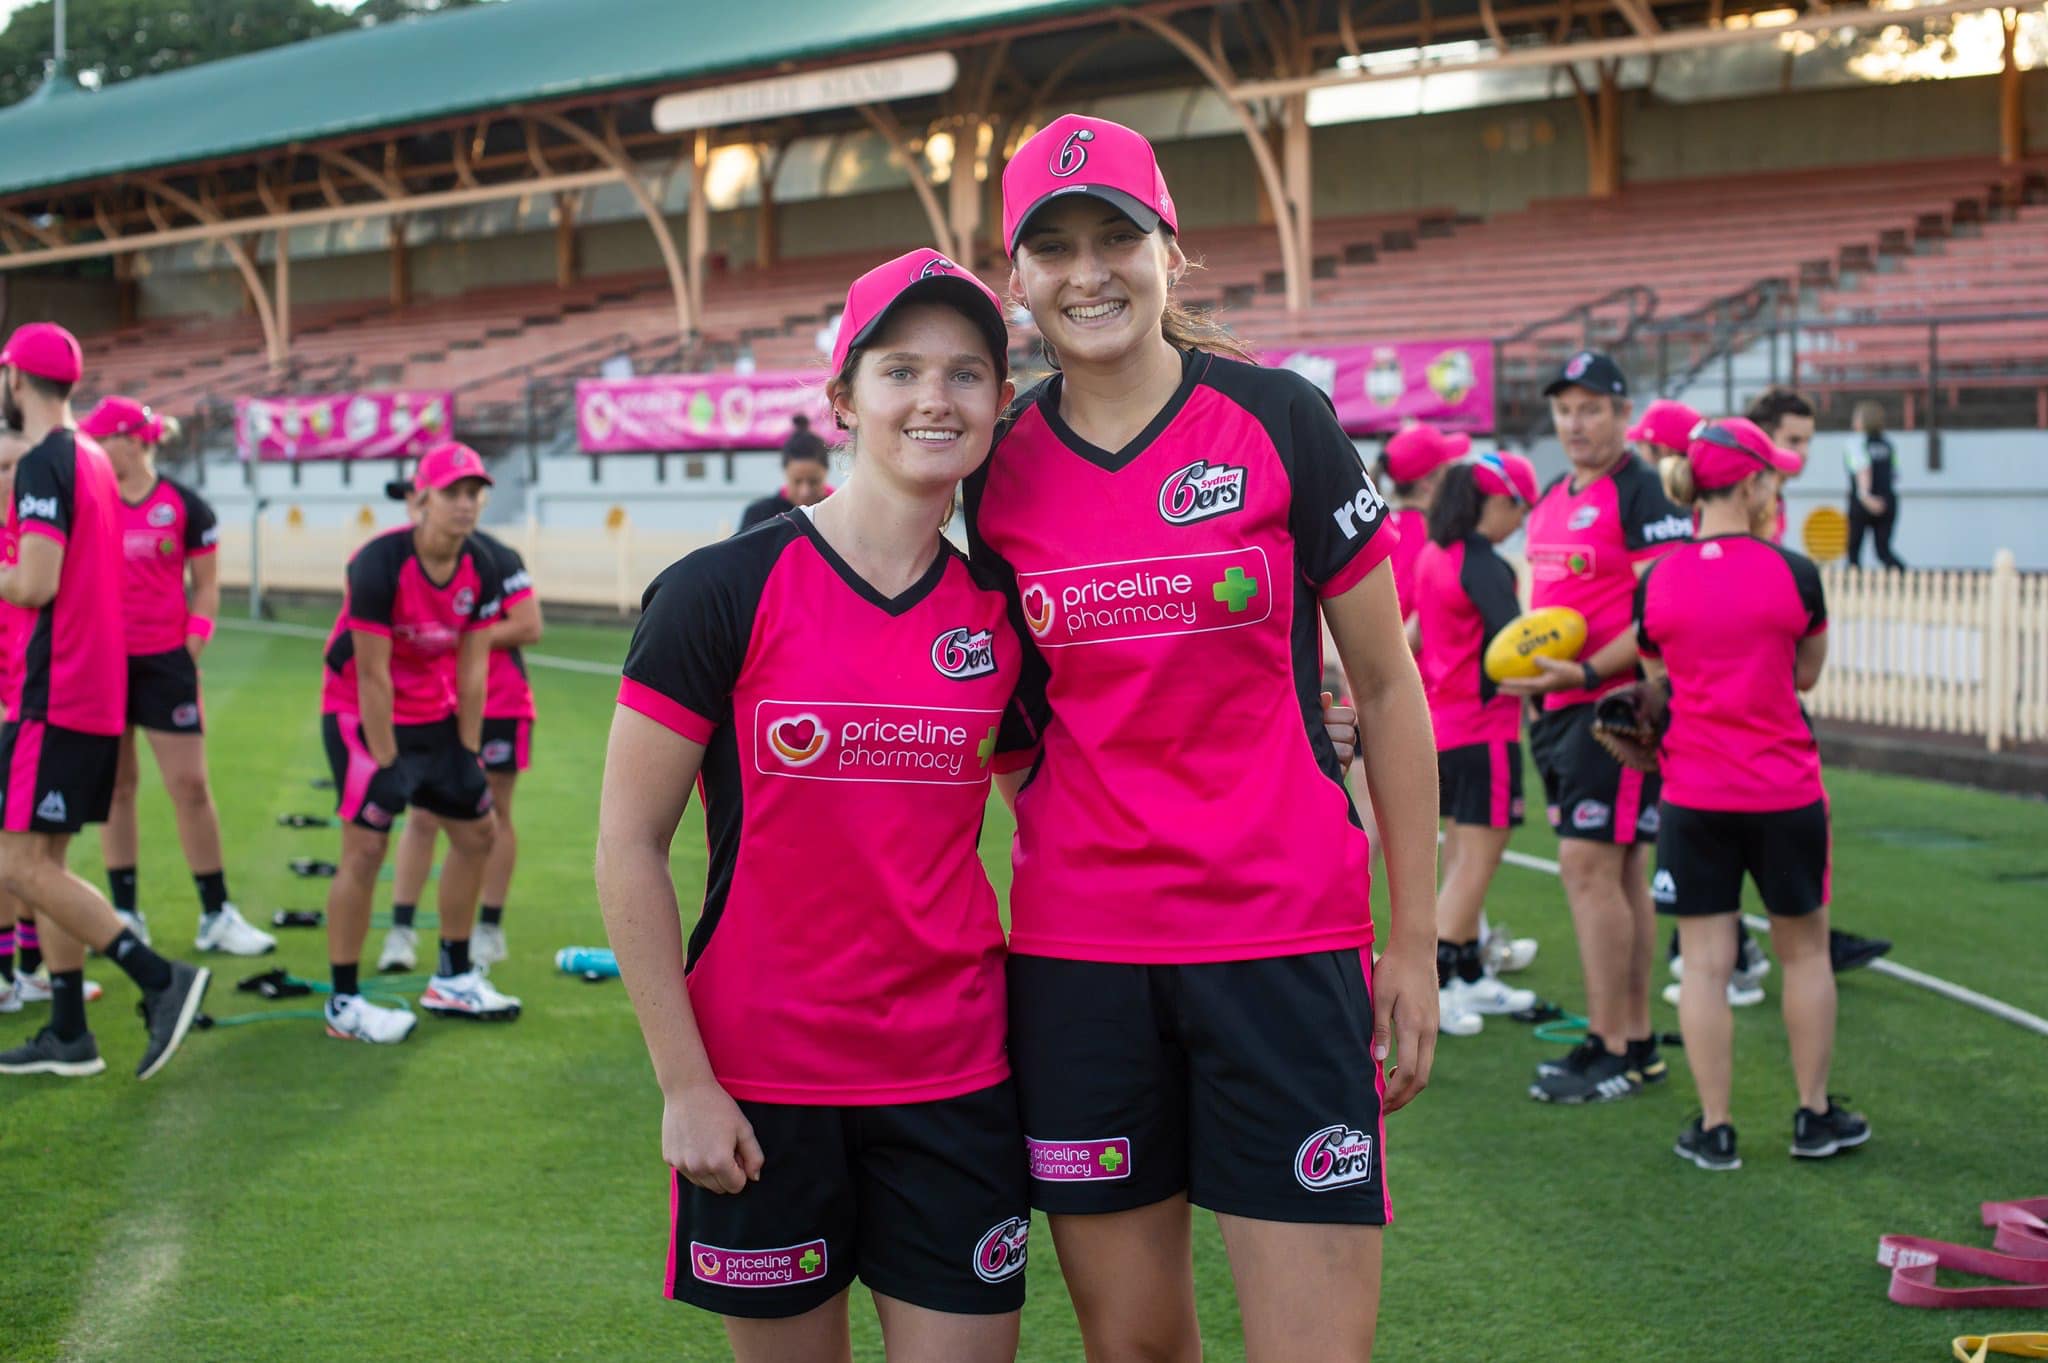 Two players from Universities Women's Cricket Club - Maddy Darke and Stella Campbell - made their WBBL debuts for the Sydney Sixers last weekend